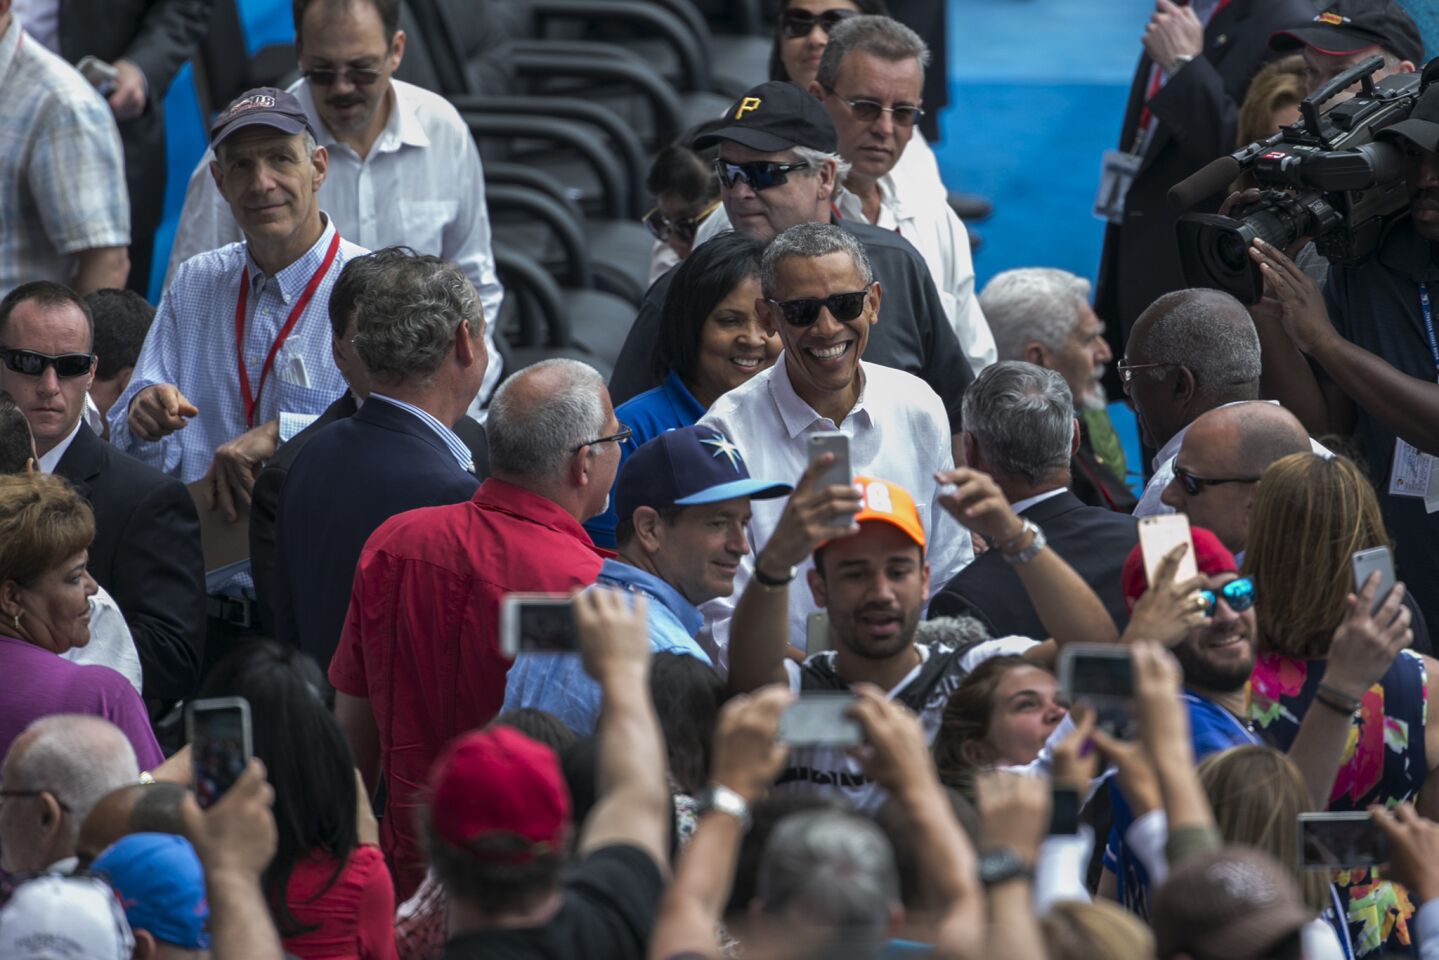 President Barack Obama visits in March with special guests at an exhibition baseball game between the Tampa Bay Rays and the Cuban National Team at Cuba's Estadio Latinoamericano.